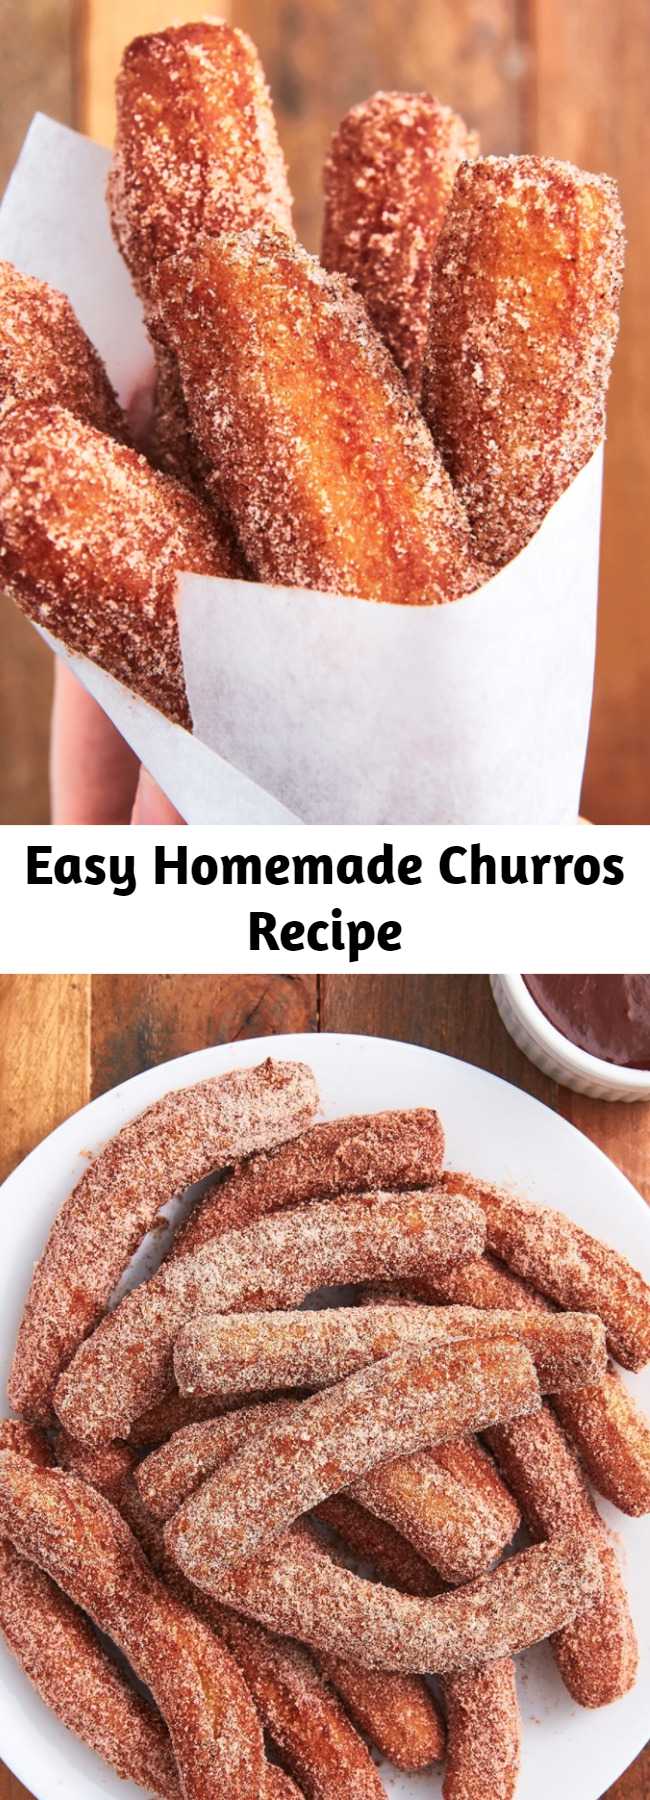 Easy Homemade Churros Recipe - We don't often feel like breaking out all of our oil to fry things. But when you have an easy churro recipe this delicious, it's absolutely worth it. They only take a few minutes to fry and will actually still taste good at room temp, making them a great party dessert! #easy #recipe #churros #dessert #mexicanfood #dessertrecipes #cinnamon #sugar #chocolate